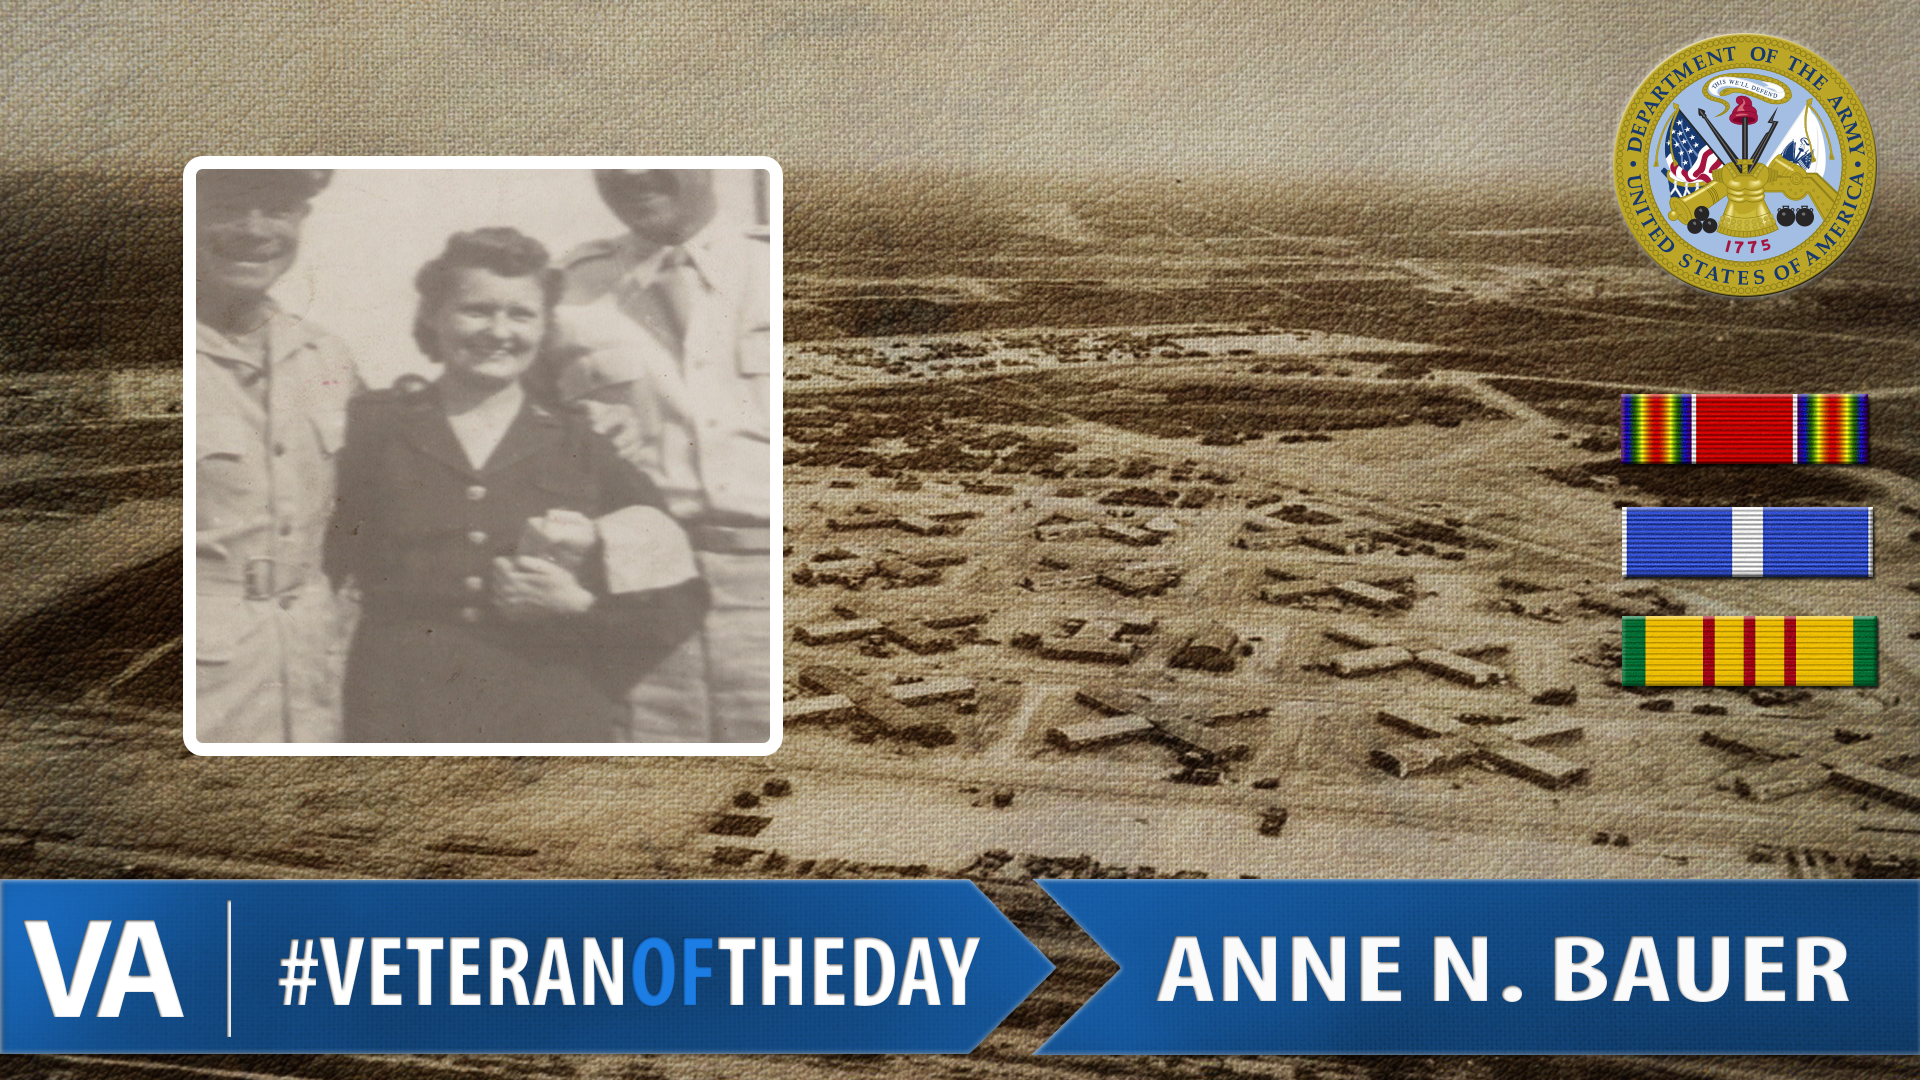 Anne N. Bauer - Veteran of the Day